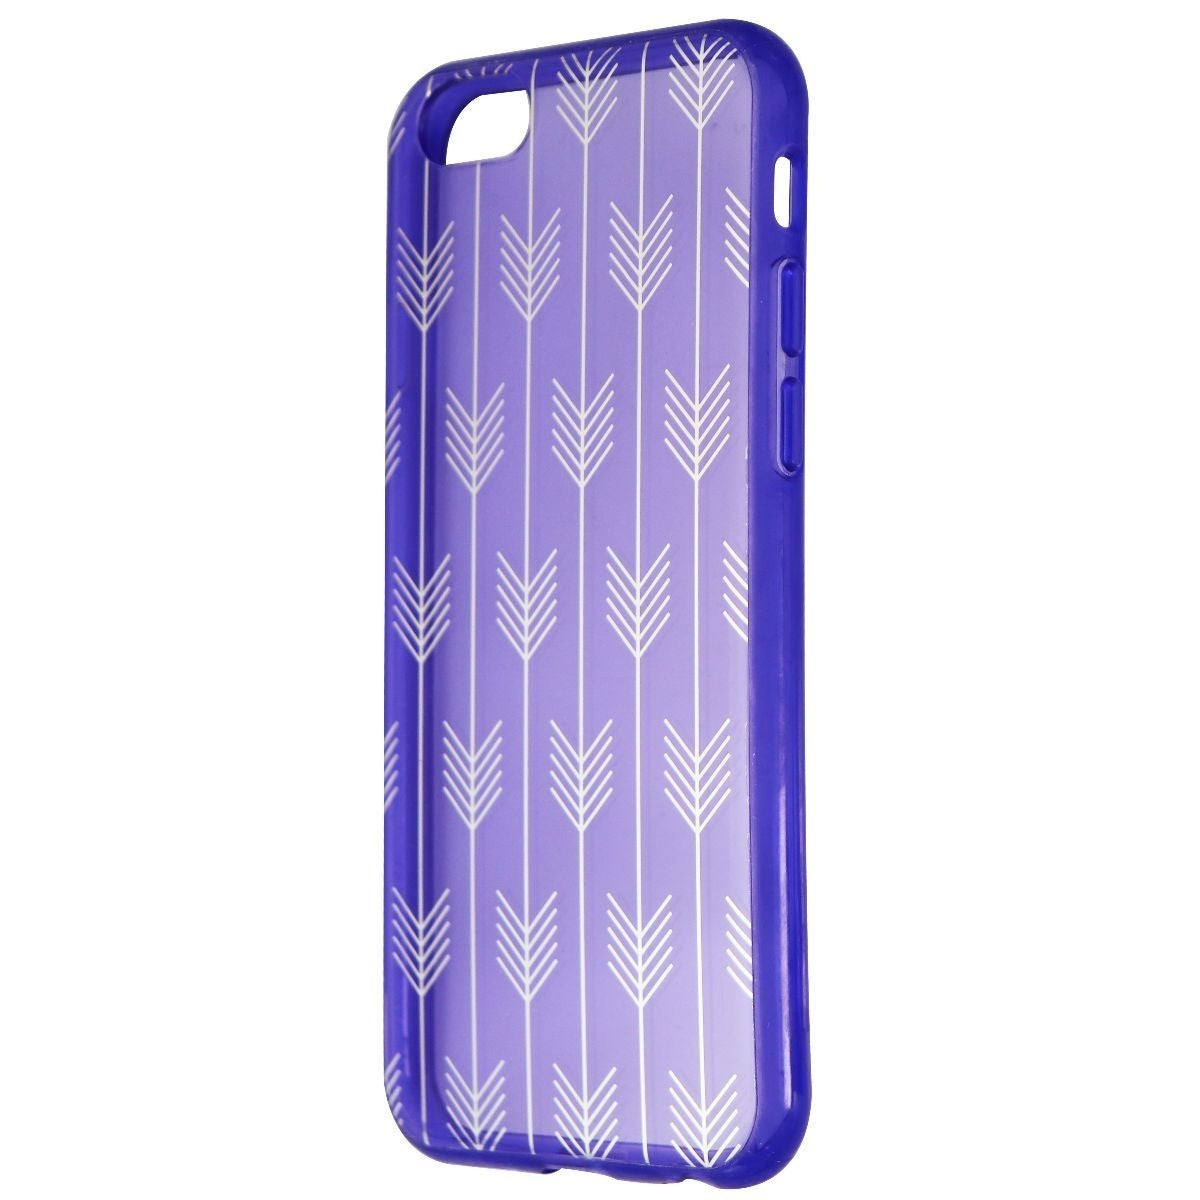 Incipio Design Series Hybrid Case for Apple iPhone 6s/6 - Purple/Silver Arrows Cell Phone - Cases, Covers & Skins Incipio    - Simple Cell Bulk Wholesale Pricing - USA Seller